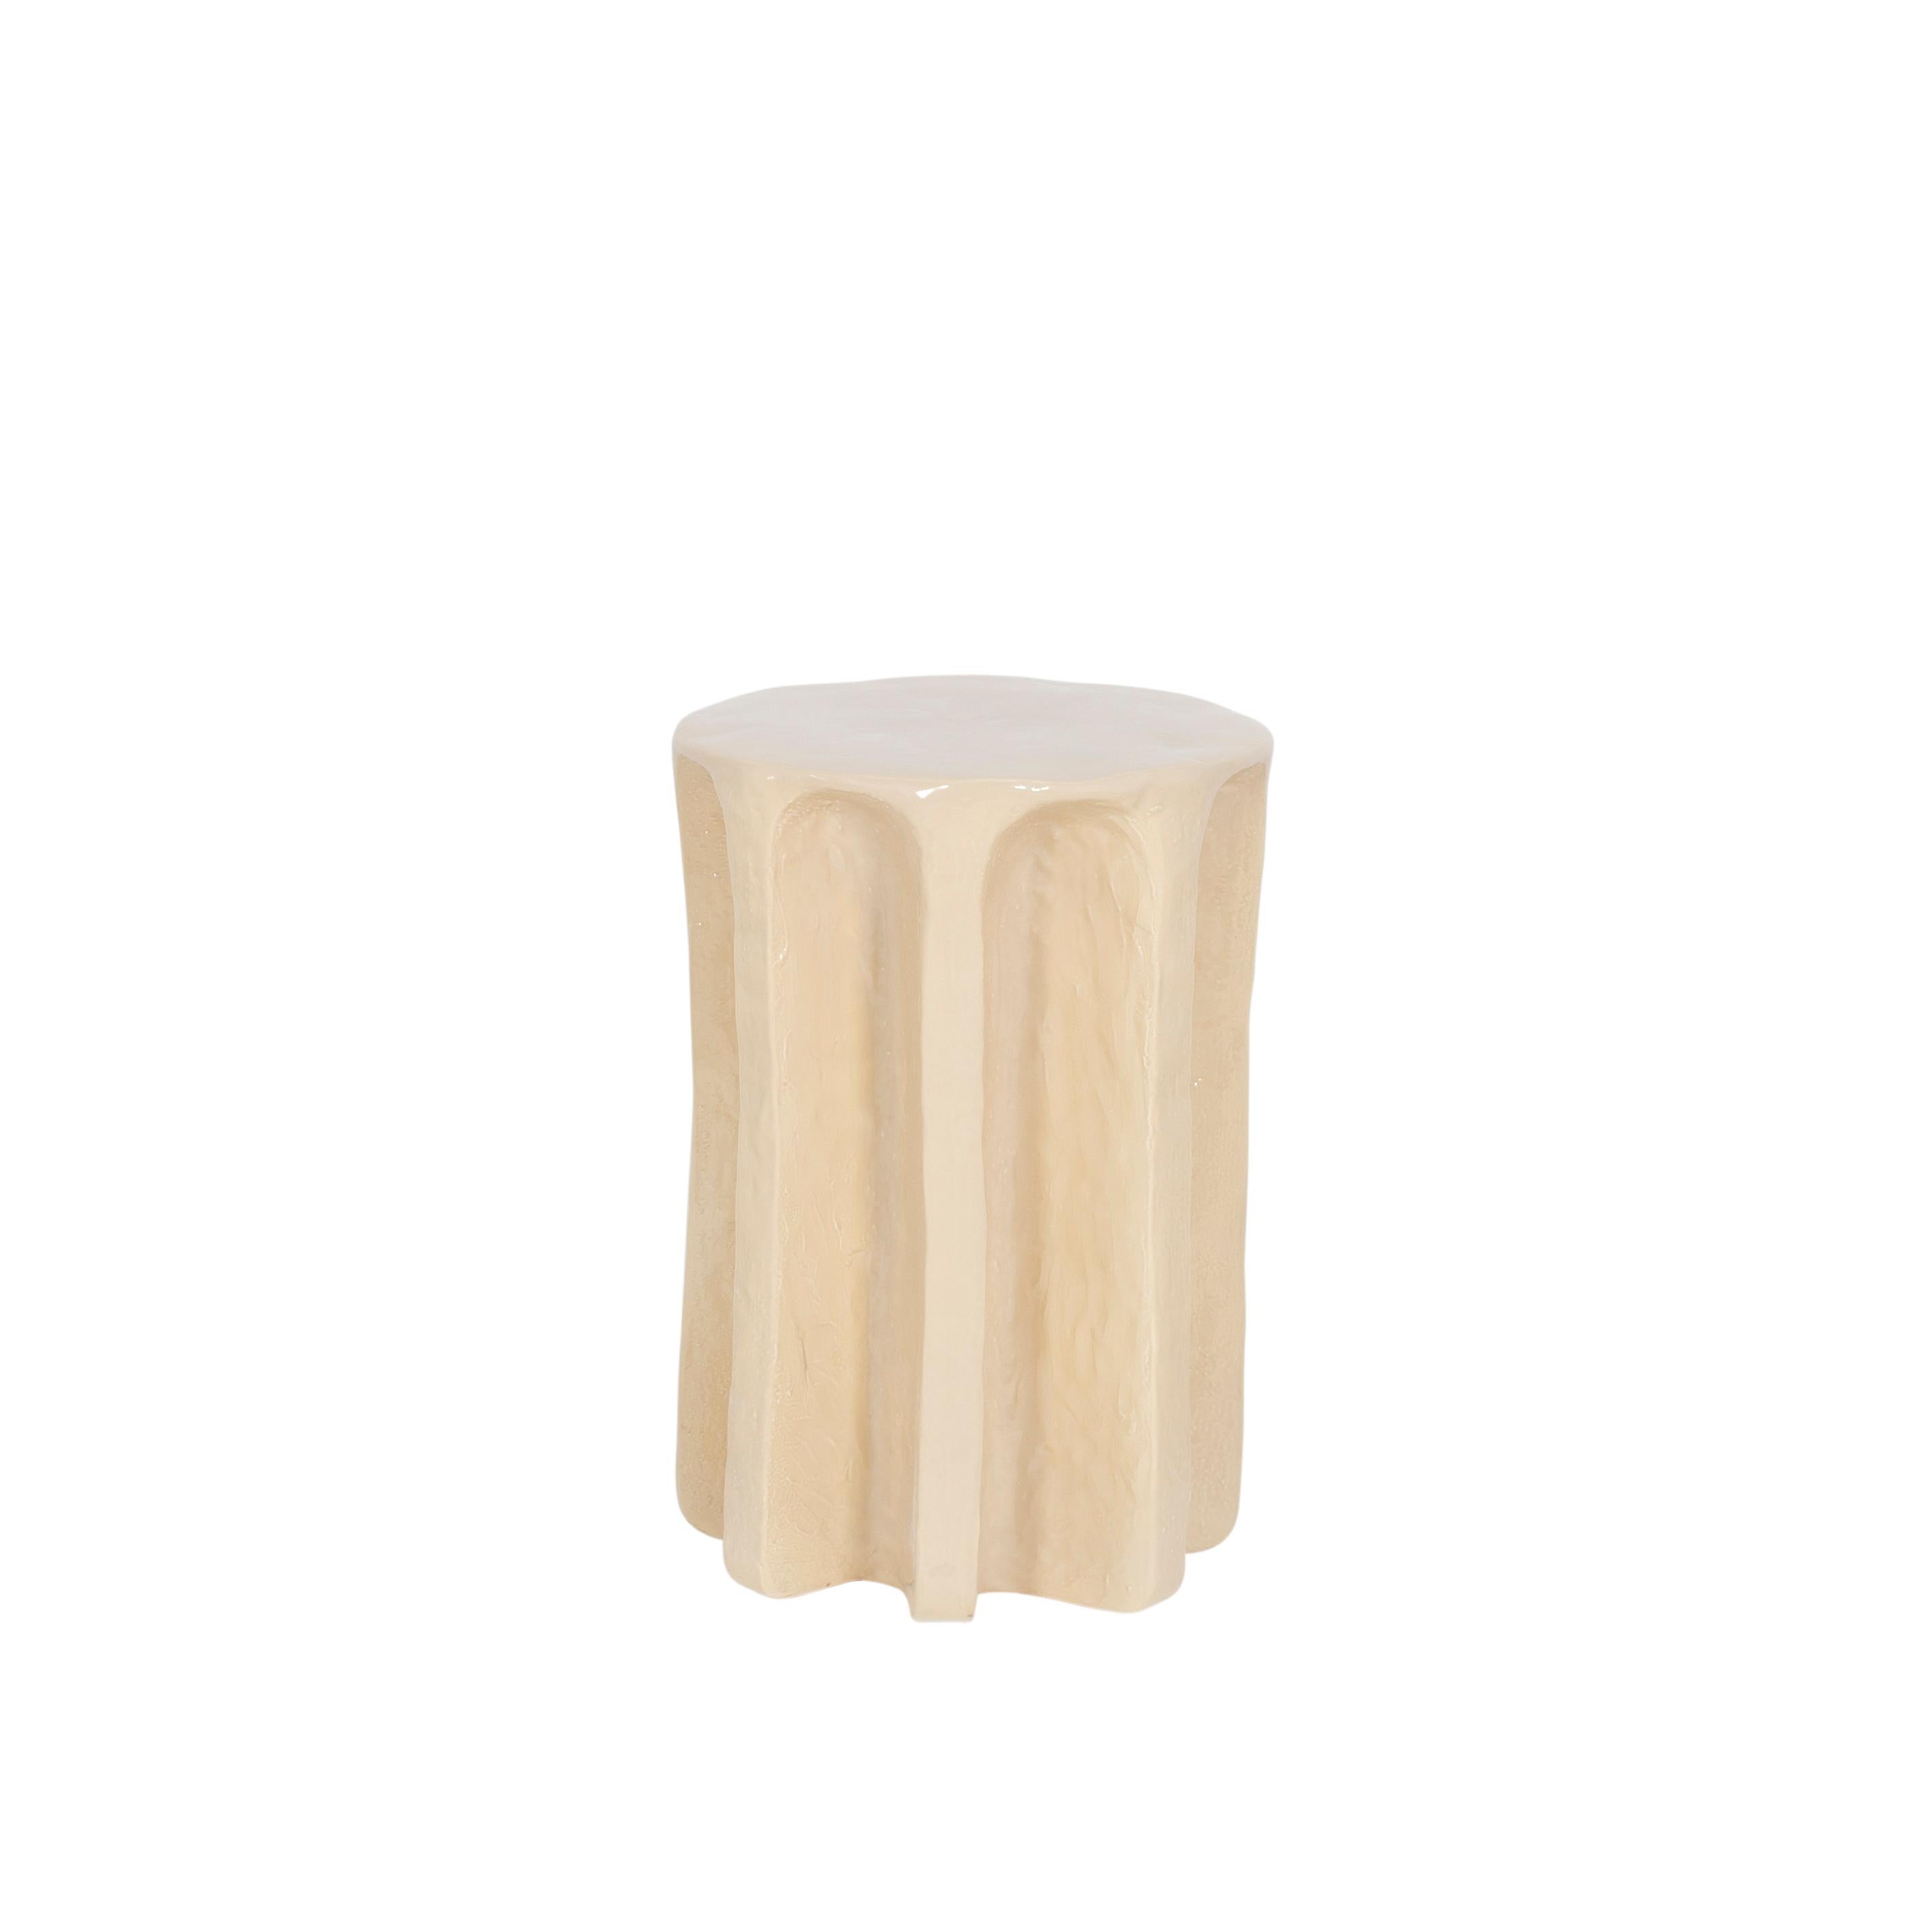 Chouchou high sand side table by Pulpo
Dimensions: D 39 x H 57 cm
Materials: ceramic

Also available in different colours.

Chouchou bears the contours of an antique column – which, knowing designer Lorenzo Zanovello’s, is most likely a